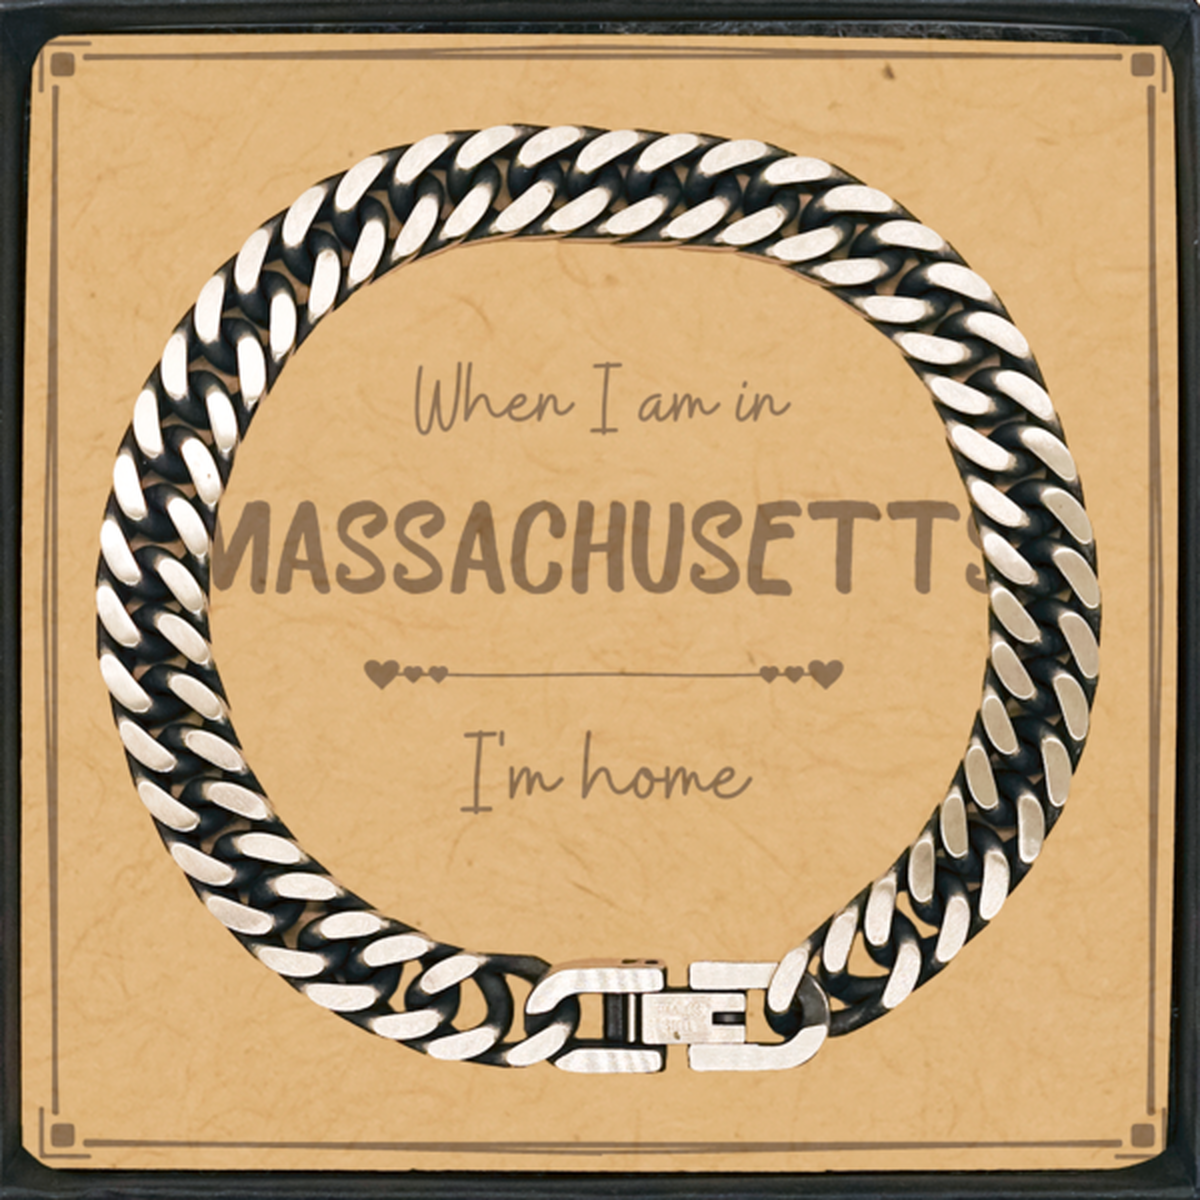 When I am in Massachusetts I'm home Cuban Link Chain Bracelet, Message Card Gifts For Massachusetts, State Massachusetts Birthday Gifts for Friends Coworker